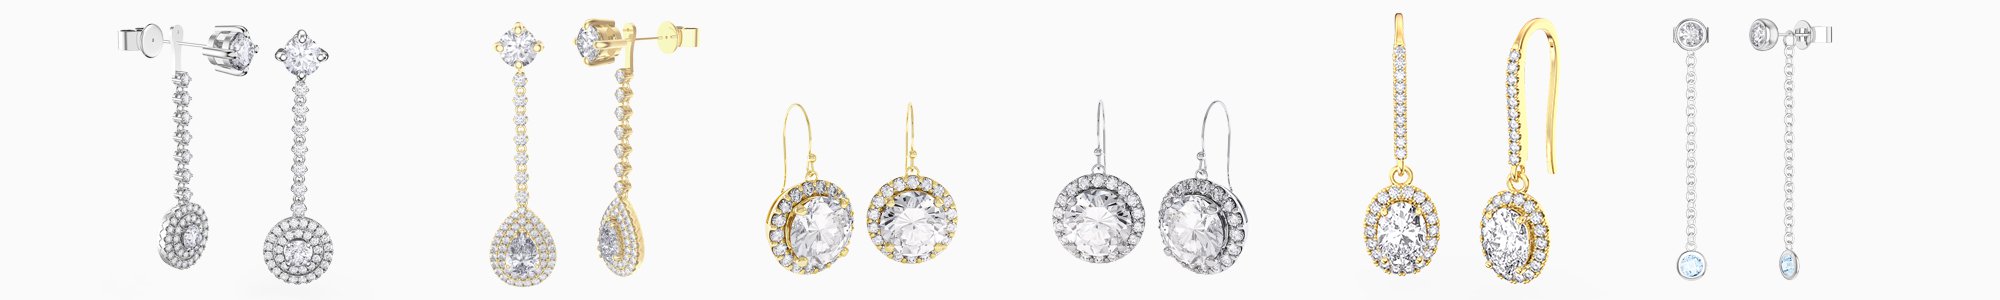 Shop Drop Earrings by Jian London. Buy direct and save from our wide selection of Drop Earrings at the Jian London jewelry Store. Free US Delivery